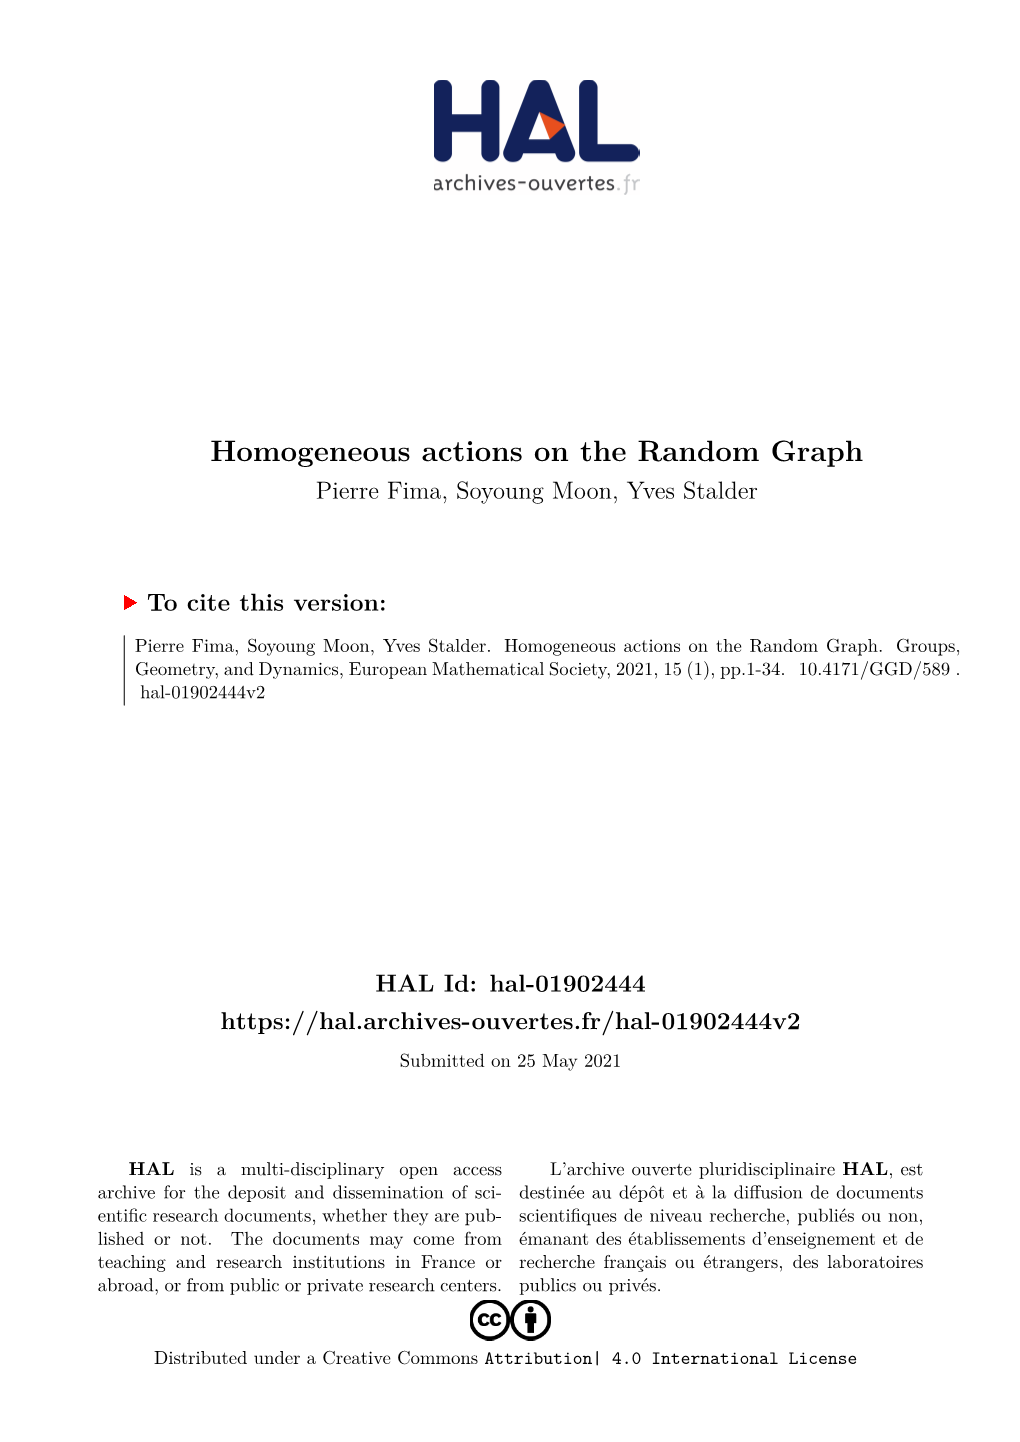 Homogeneous Actions on the Random Graph Pierre Fima, Soyoung Moon, Yves Stalder